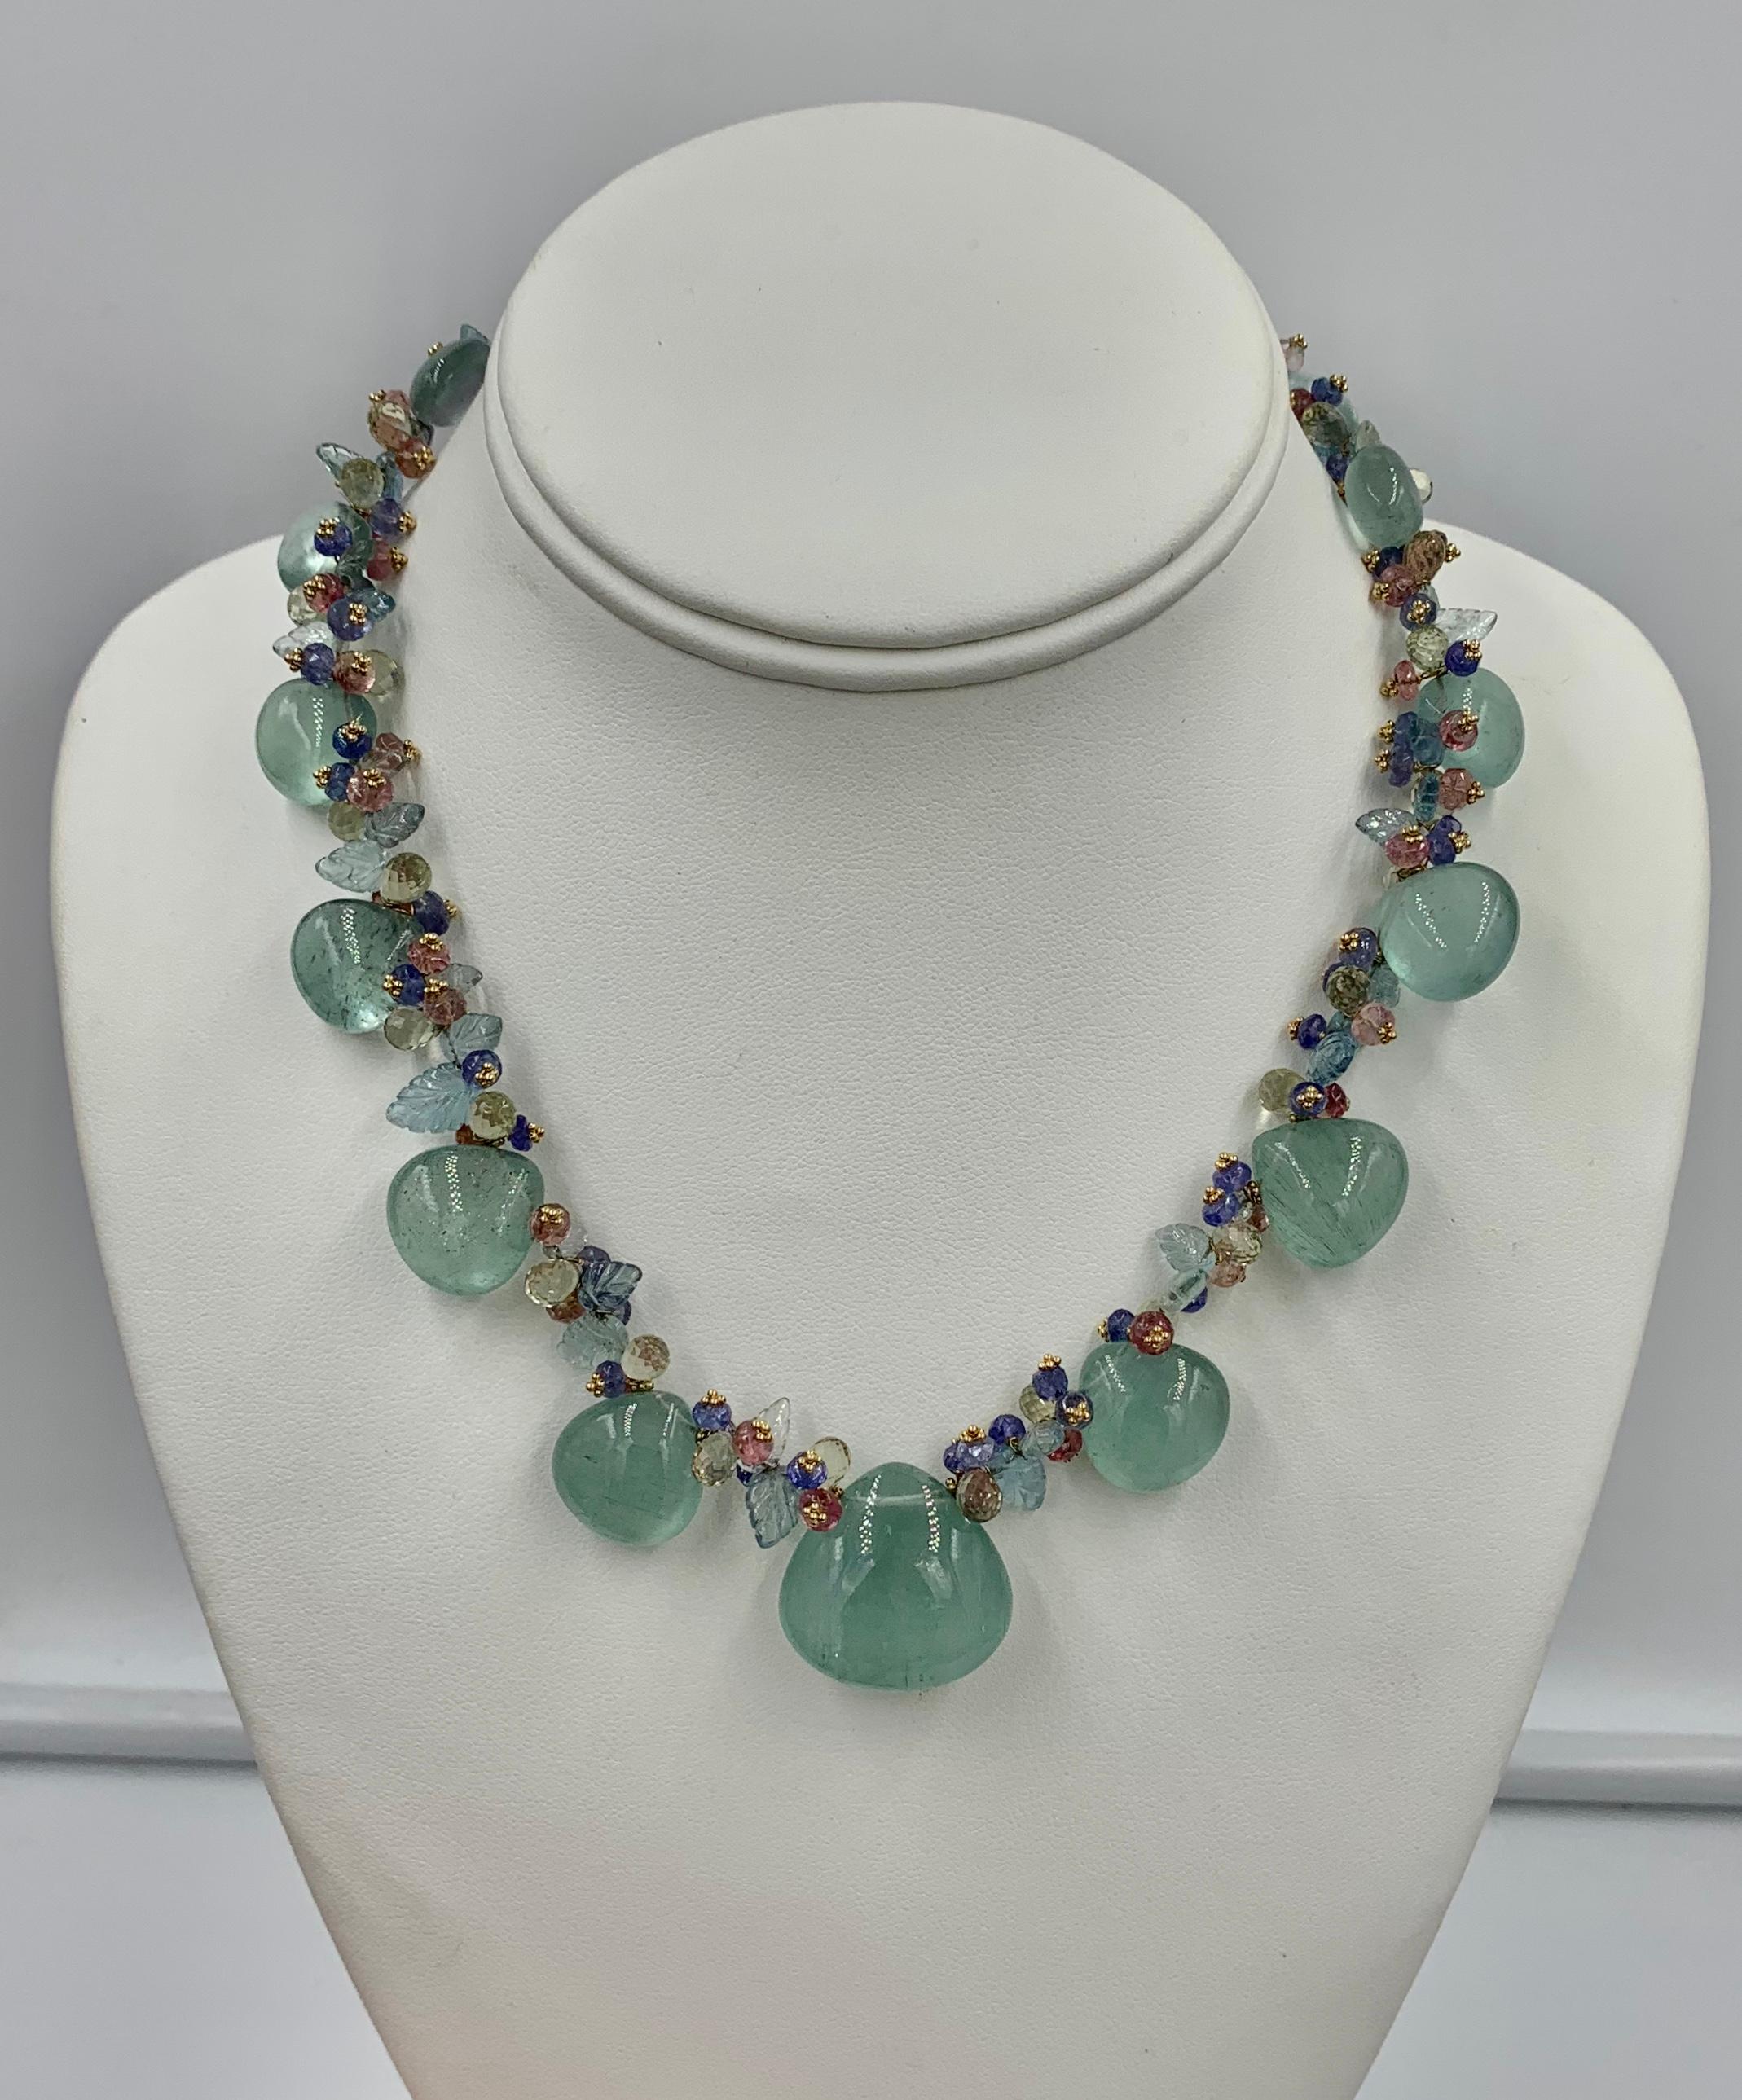 Indulge in a stunning Aquamarine, Pink Tourmaline and Tanzanite Multicolored Bead Necklace in 14 Karat Gold.  The stunning Multi Gem Necklace is set with gorgeous Aquamarine gems.   Between the large Aquas are fancy cut aquamarines, pink tourmaline